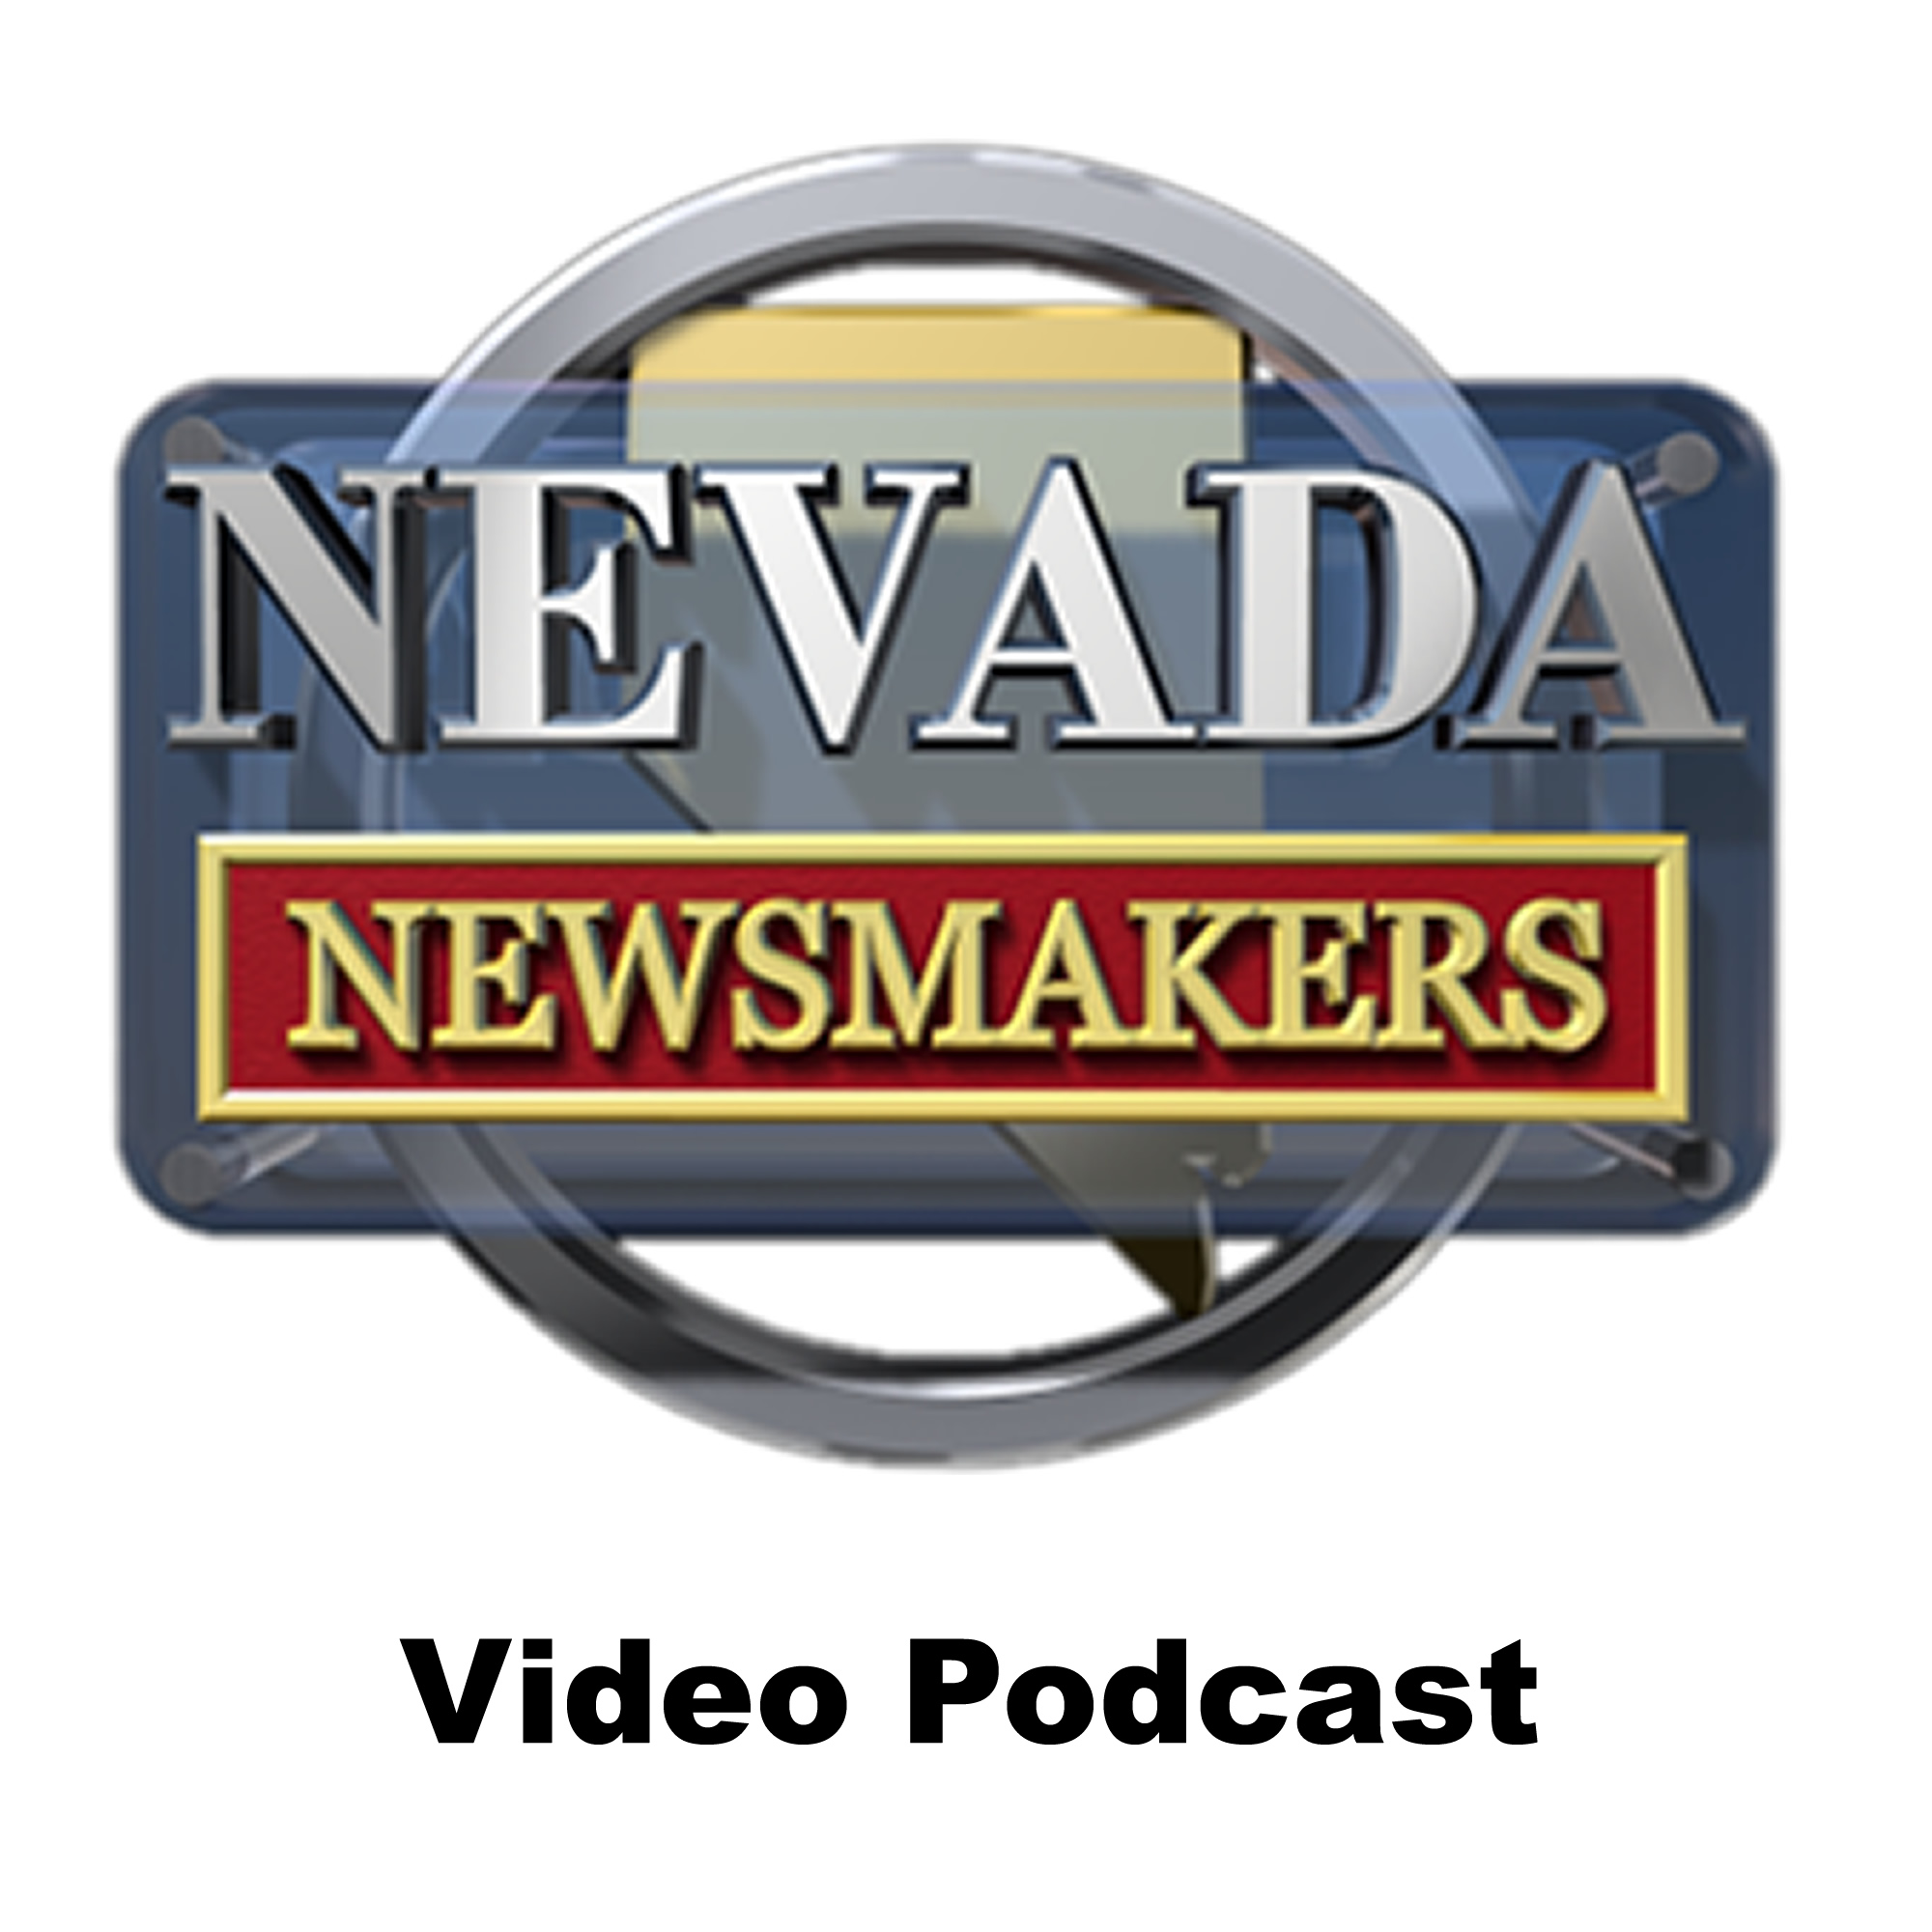 Nevada Newsmakers Videocast